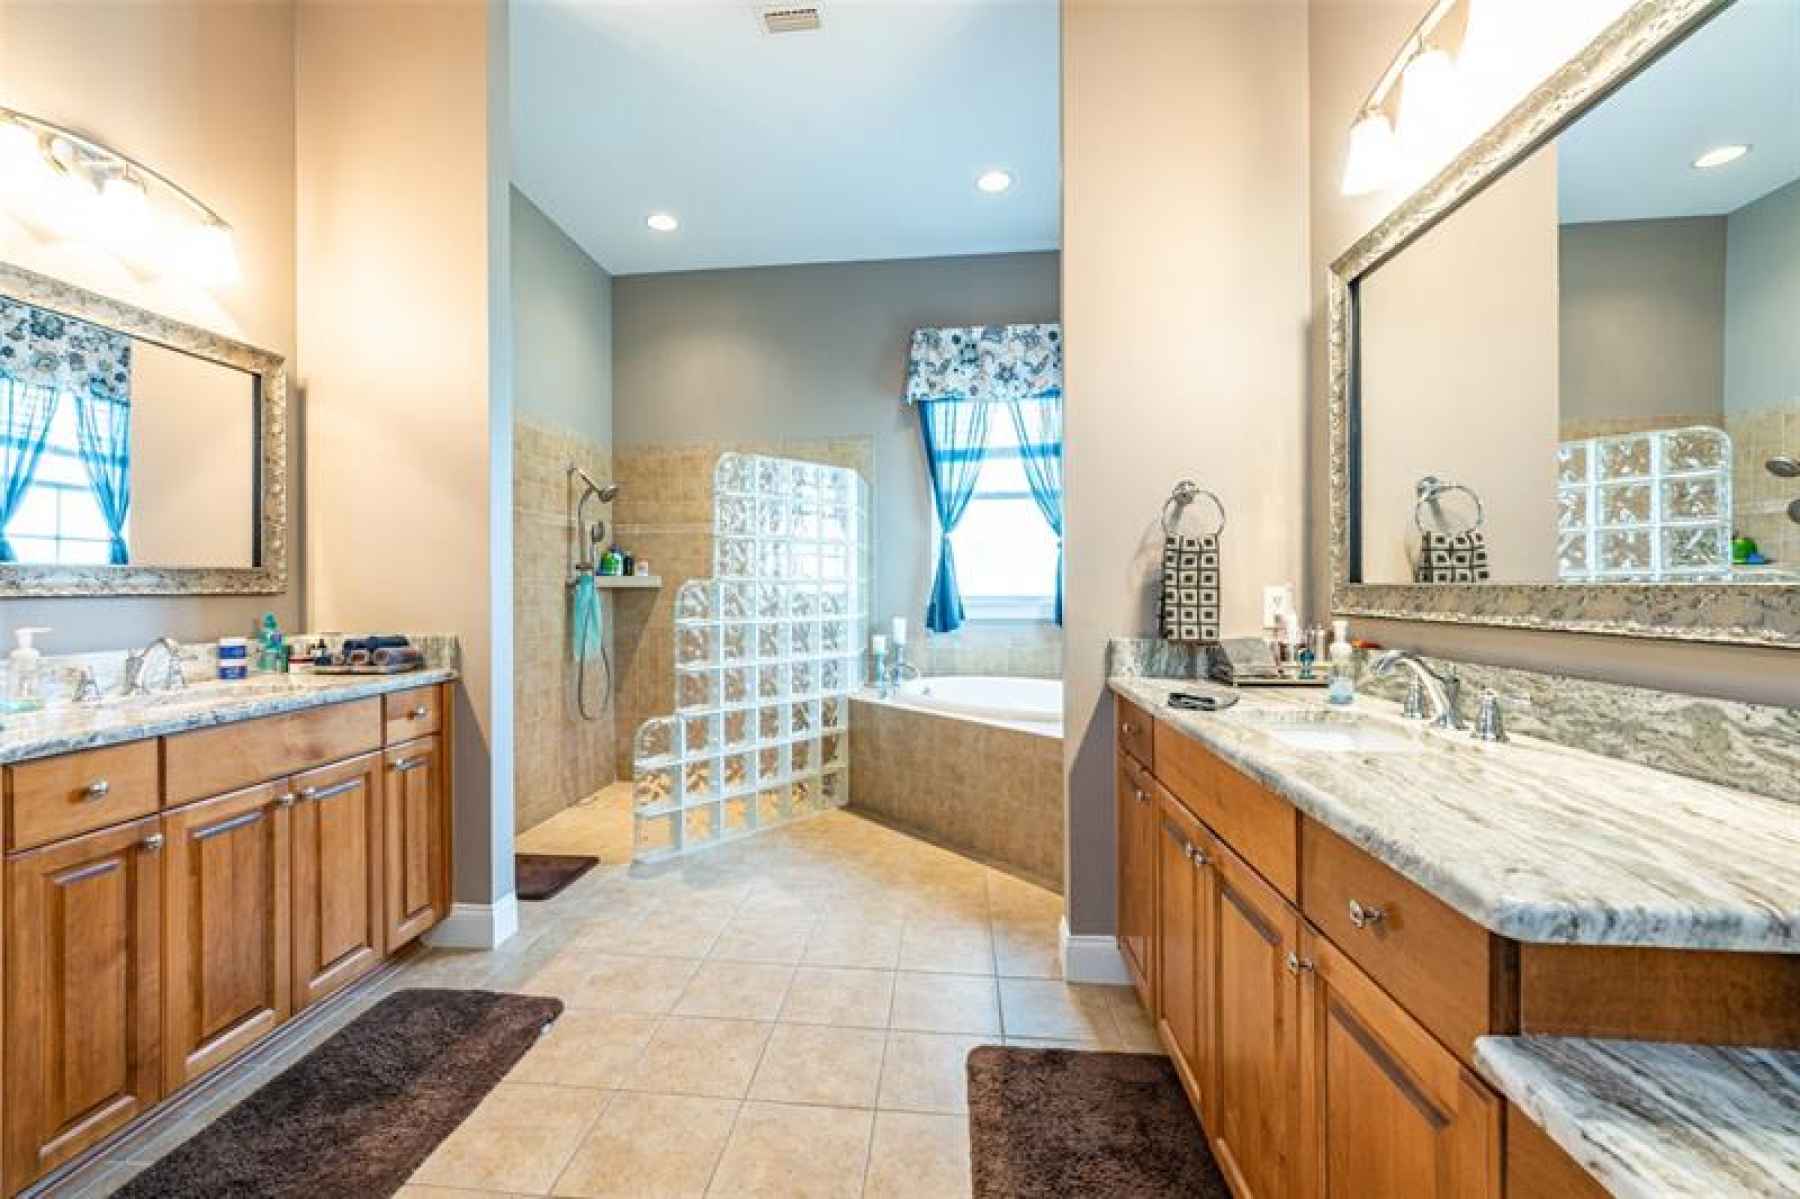 Master bath with separate vanities, garden tub, and walk in shower.